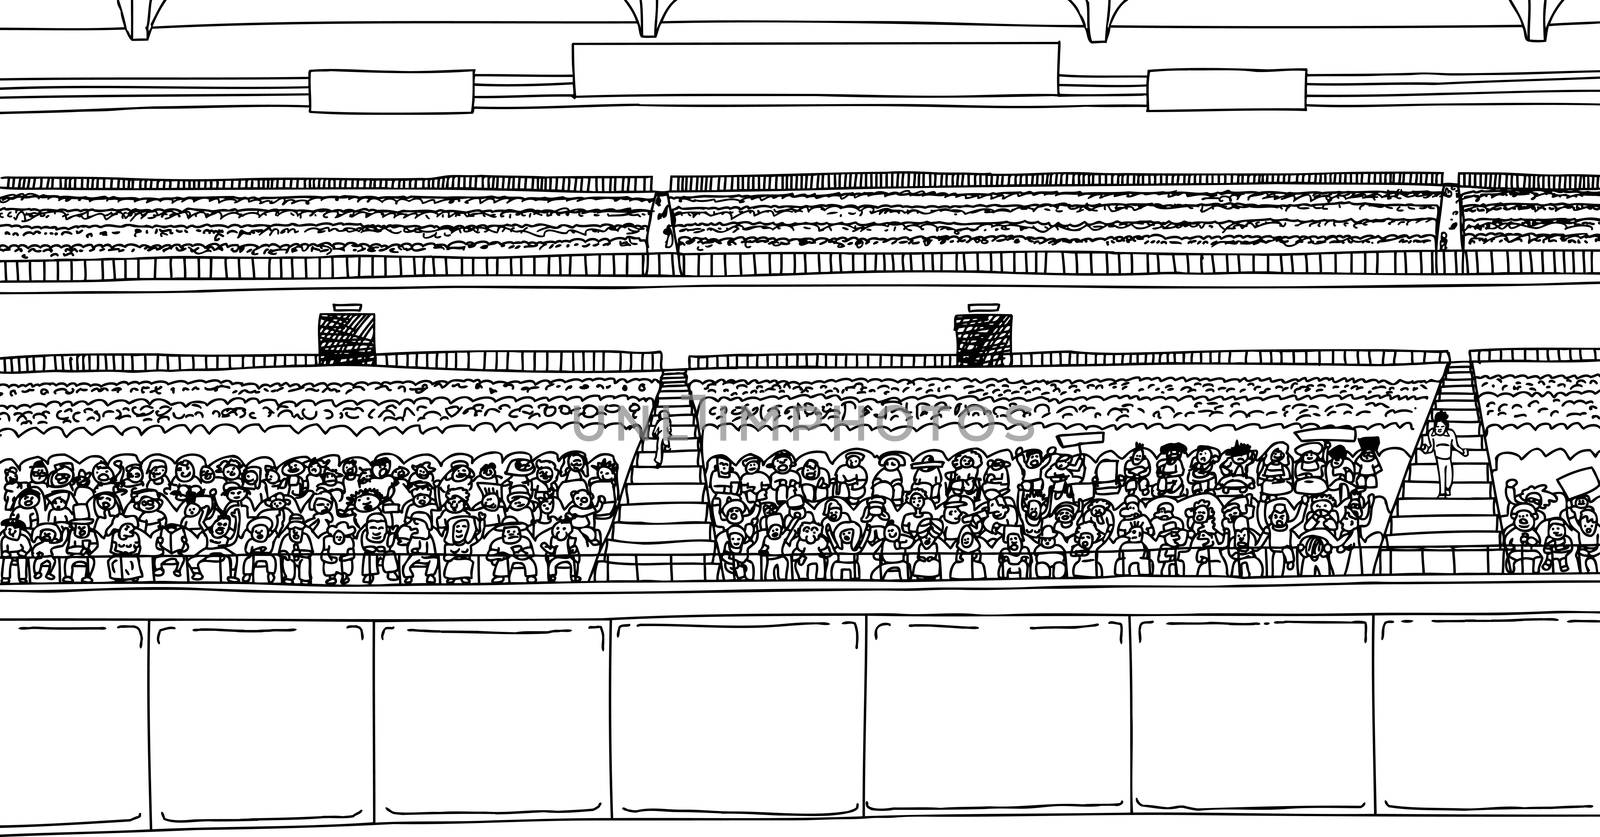 Large cartoon outline of stadium with diverse crowd under blank scoreboard signs